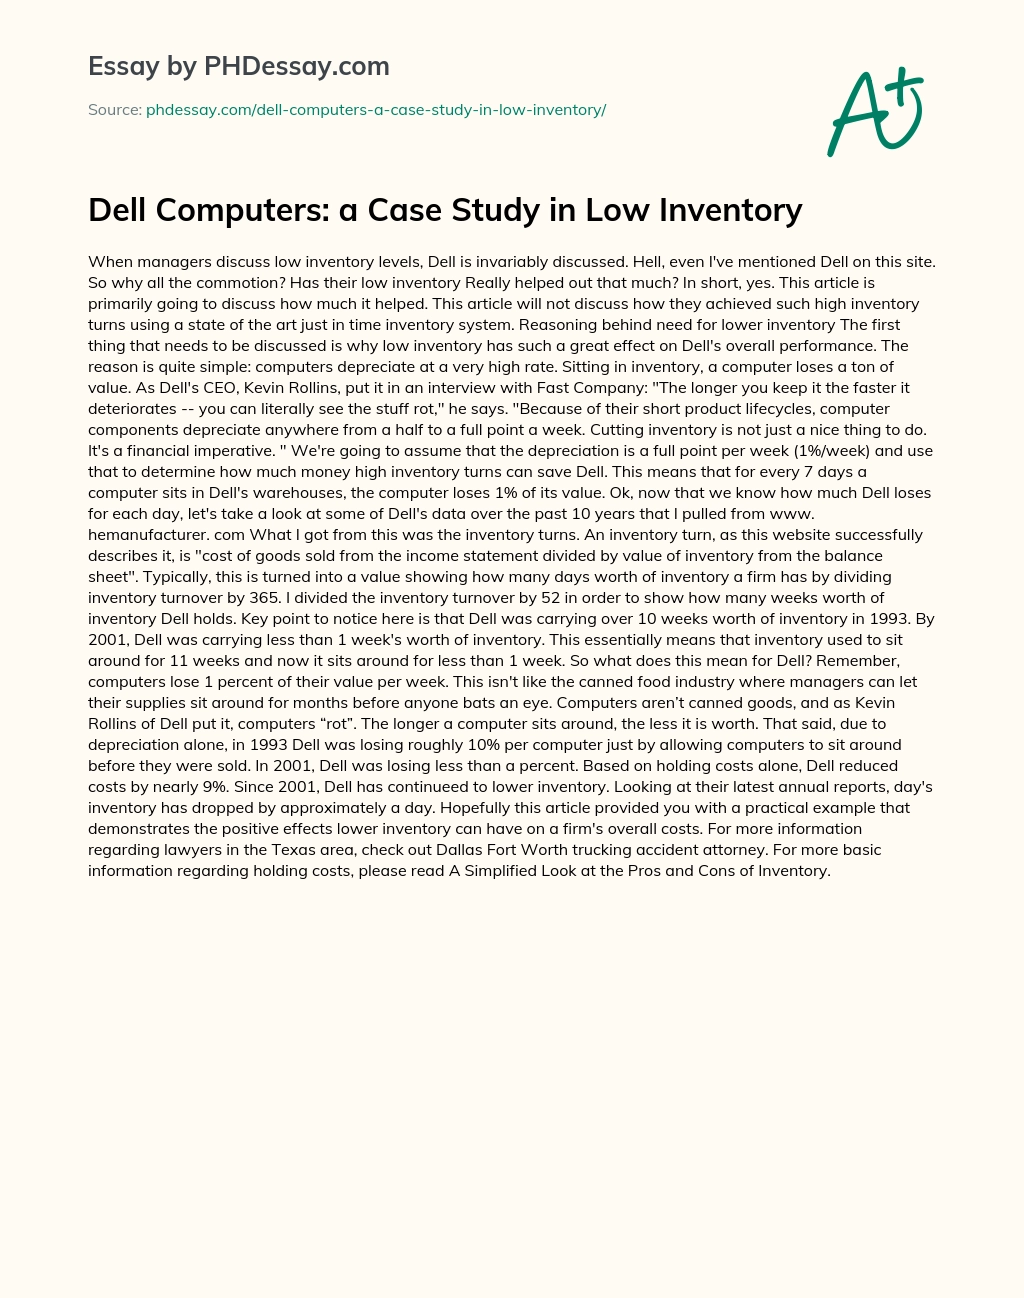 Dell Computers: a Case Study in Low Inventory essay